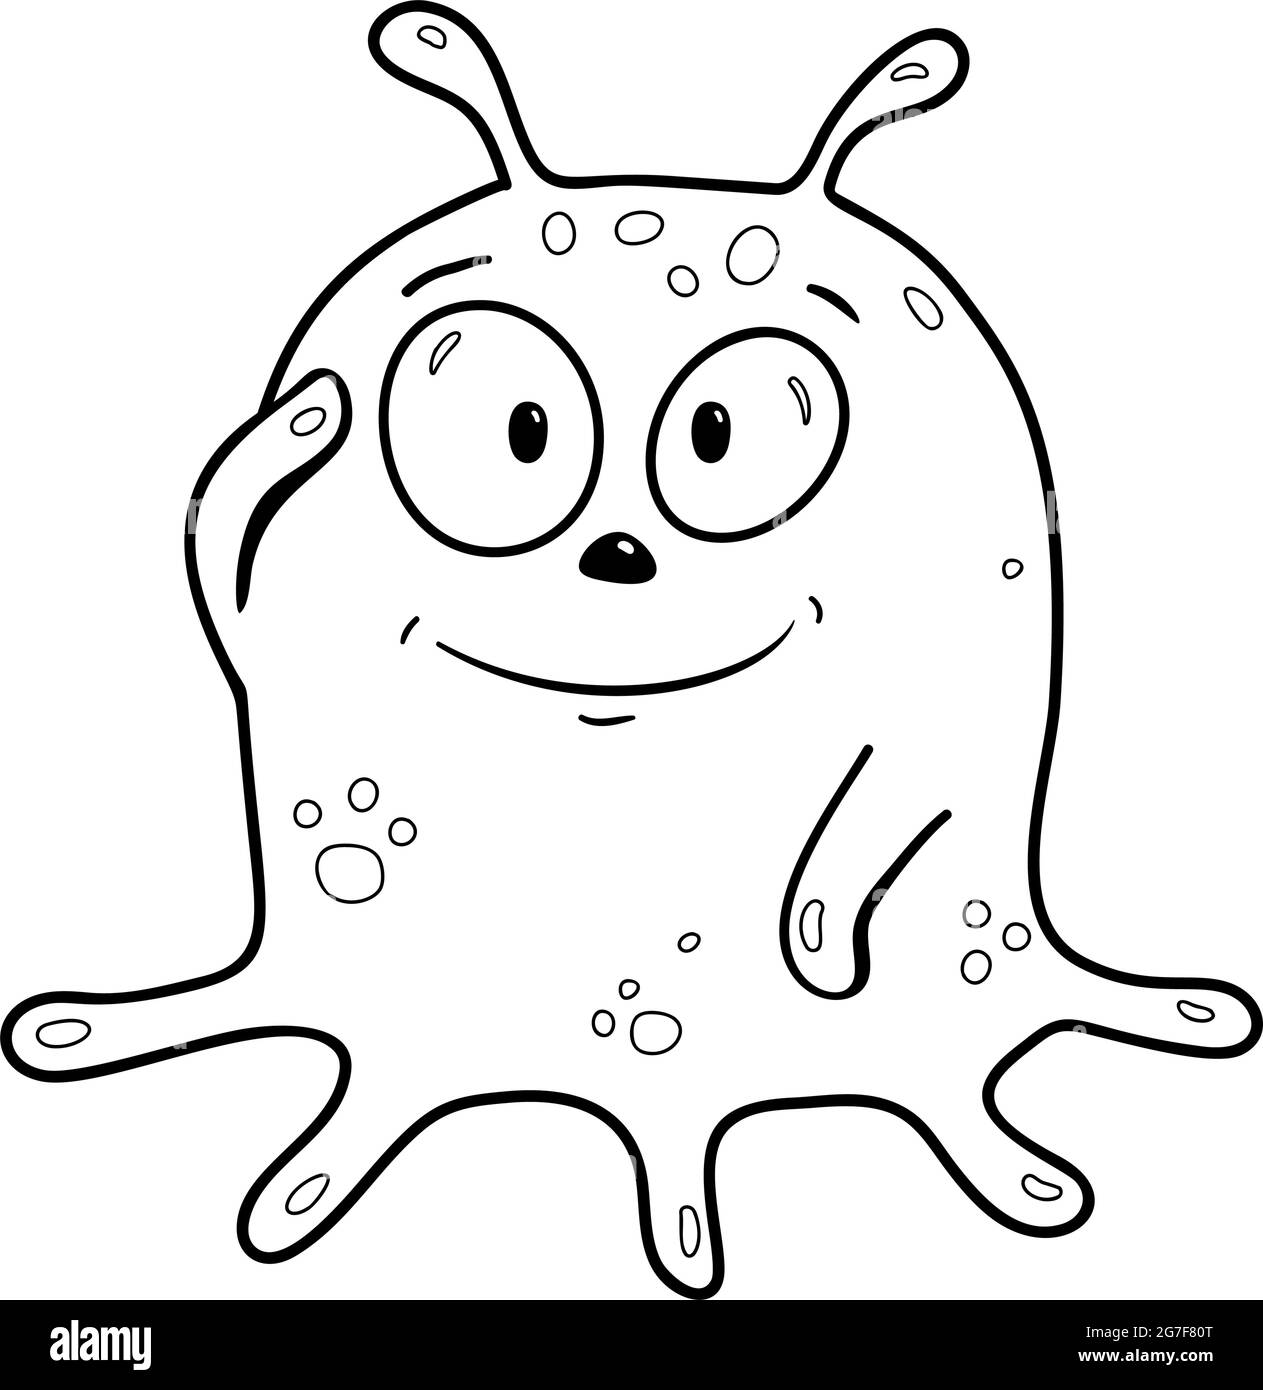 Monster Slime Coloring Page Kids Stock Vector (Royalty Free